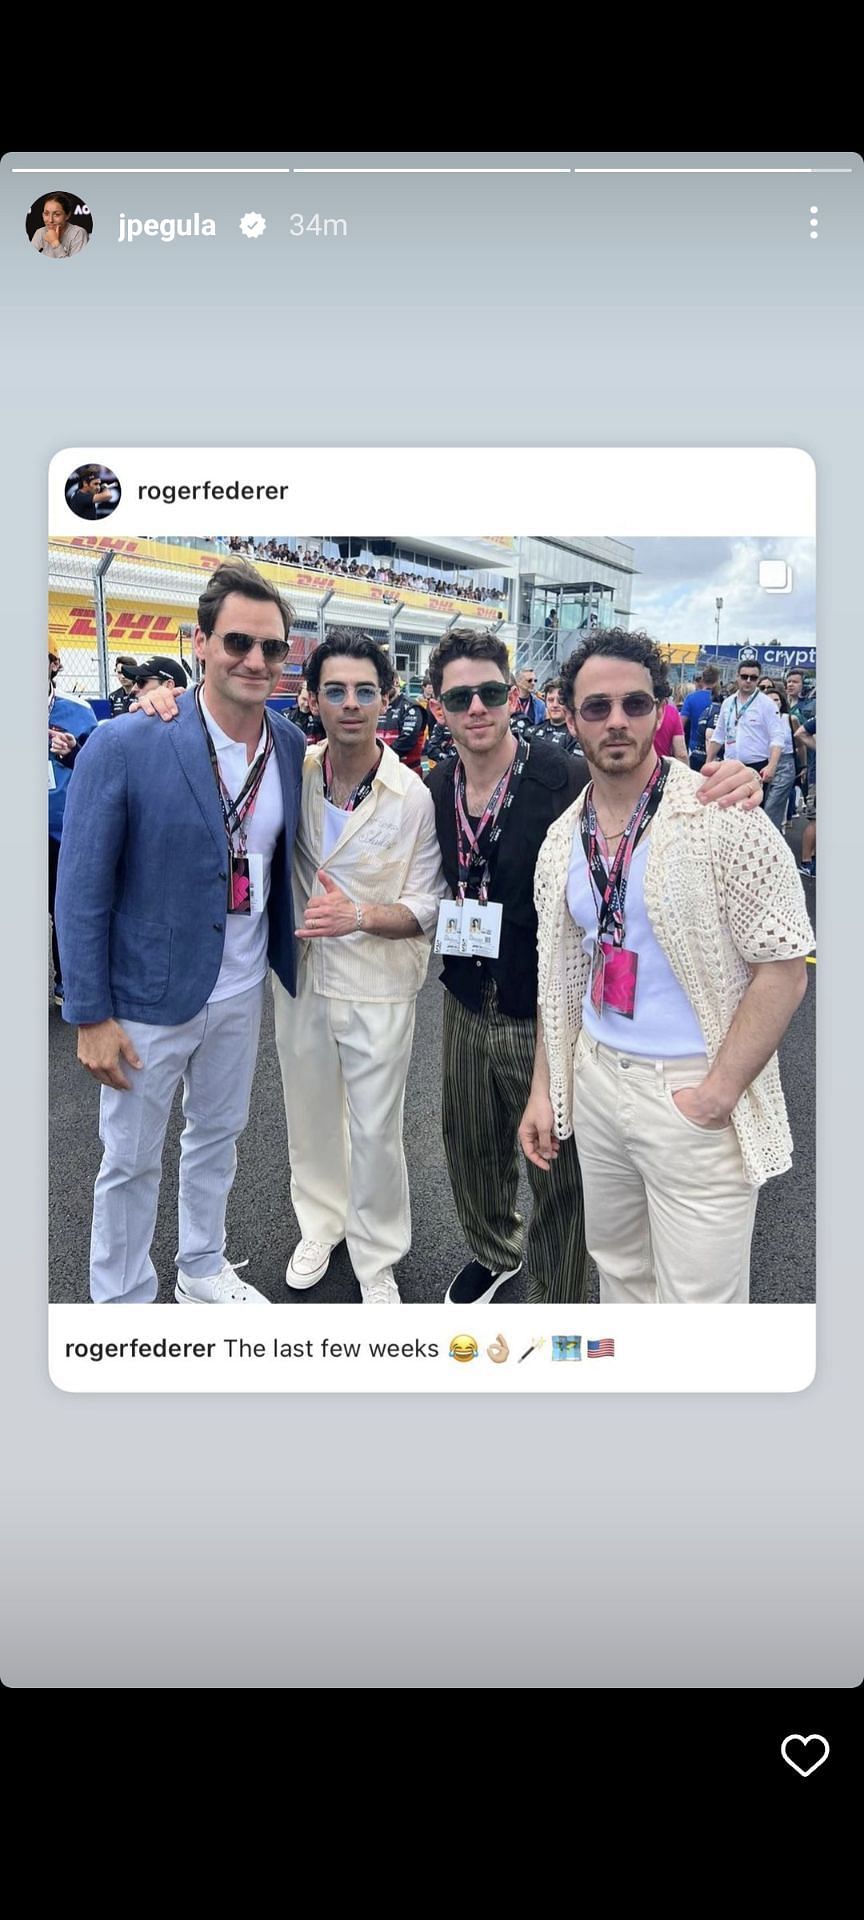 Jessica Pegula reacts to the picture of Roger Federer with the Jonas Brothers